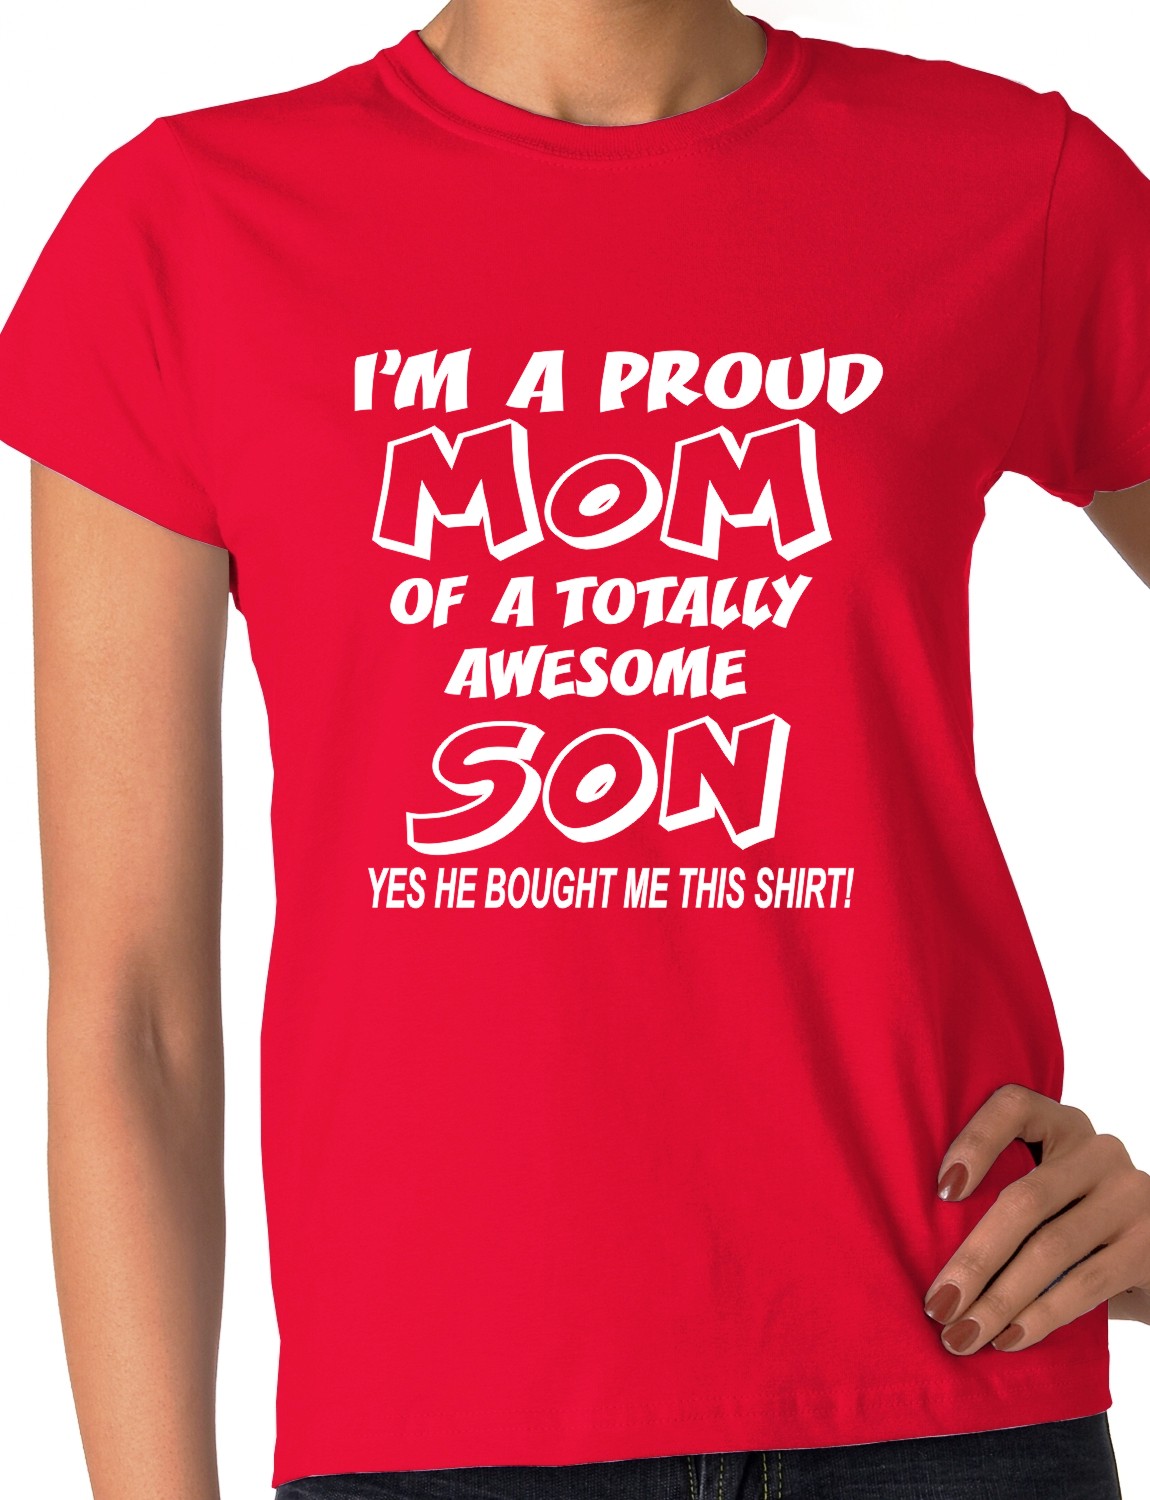 I'm A Proud Mom Awesome Son Novelty Funny Ladies Gift T-shirt Size S ...